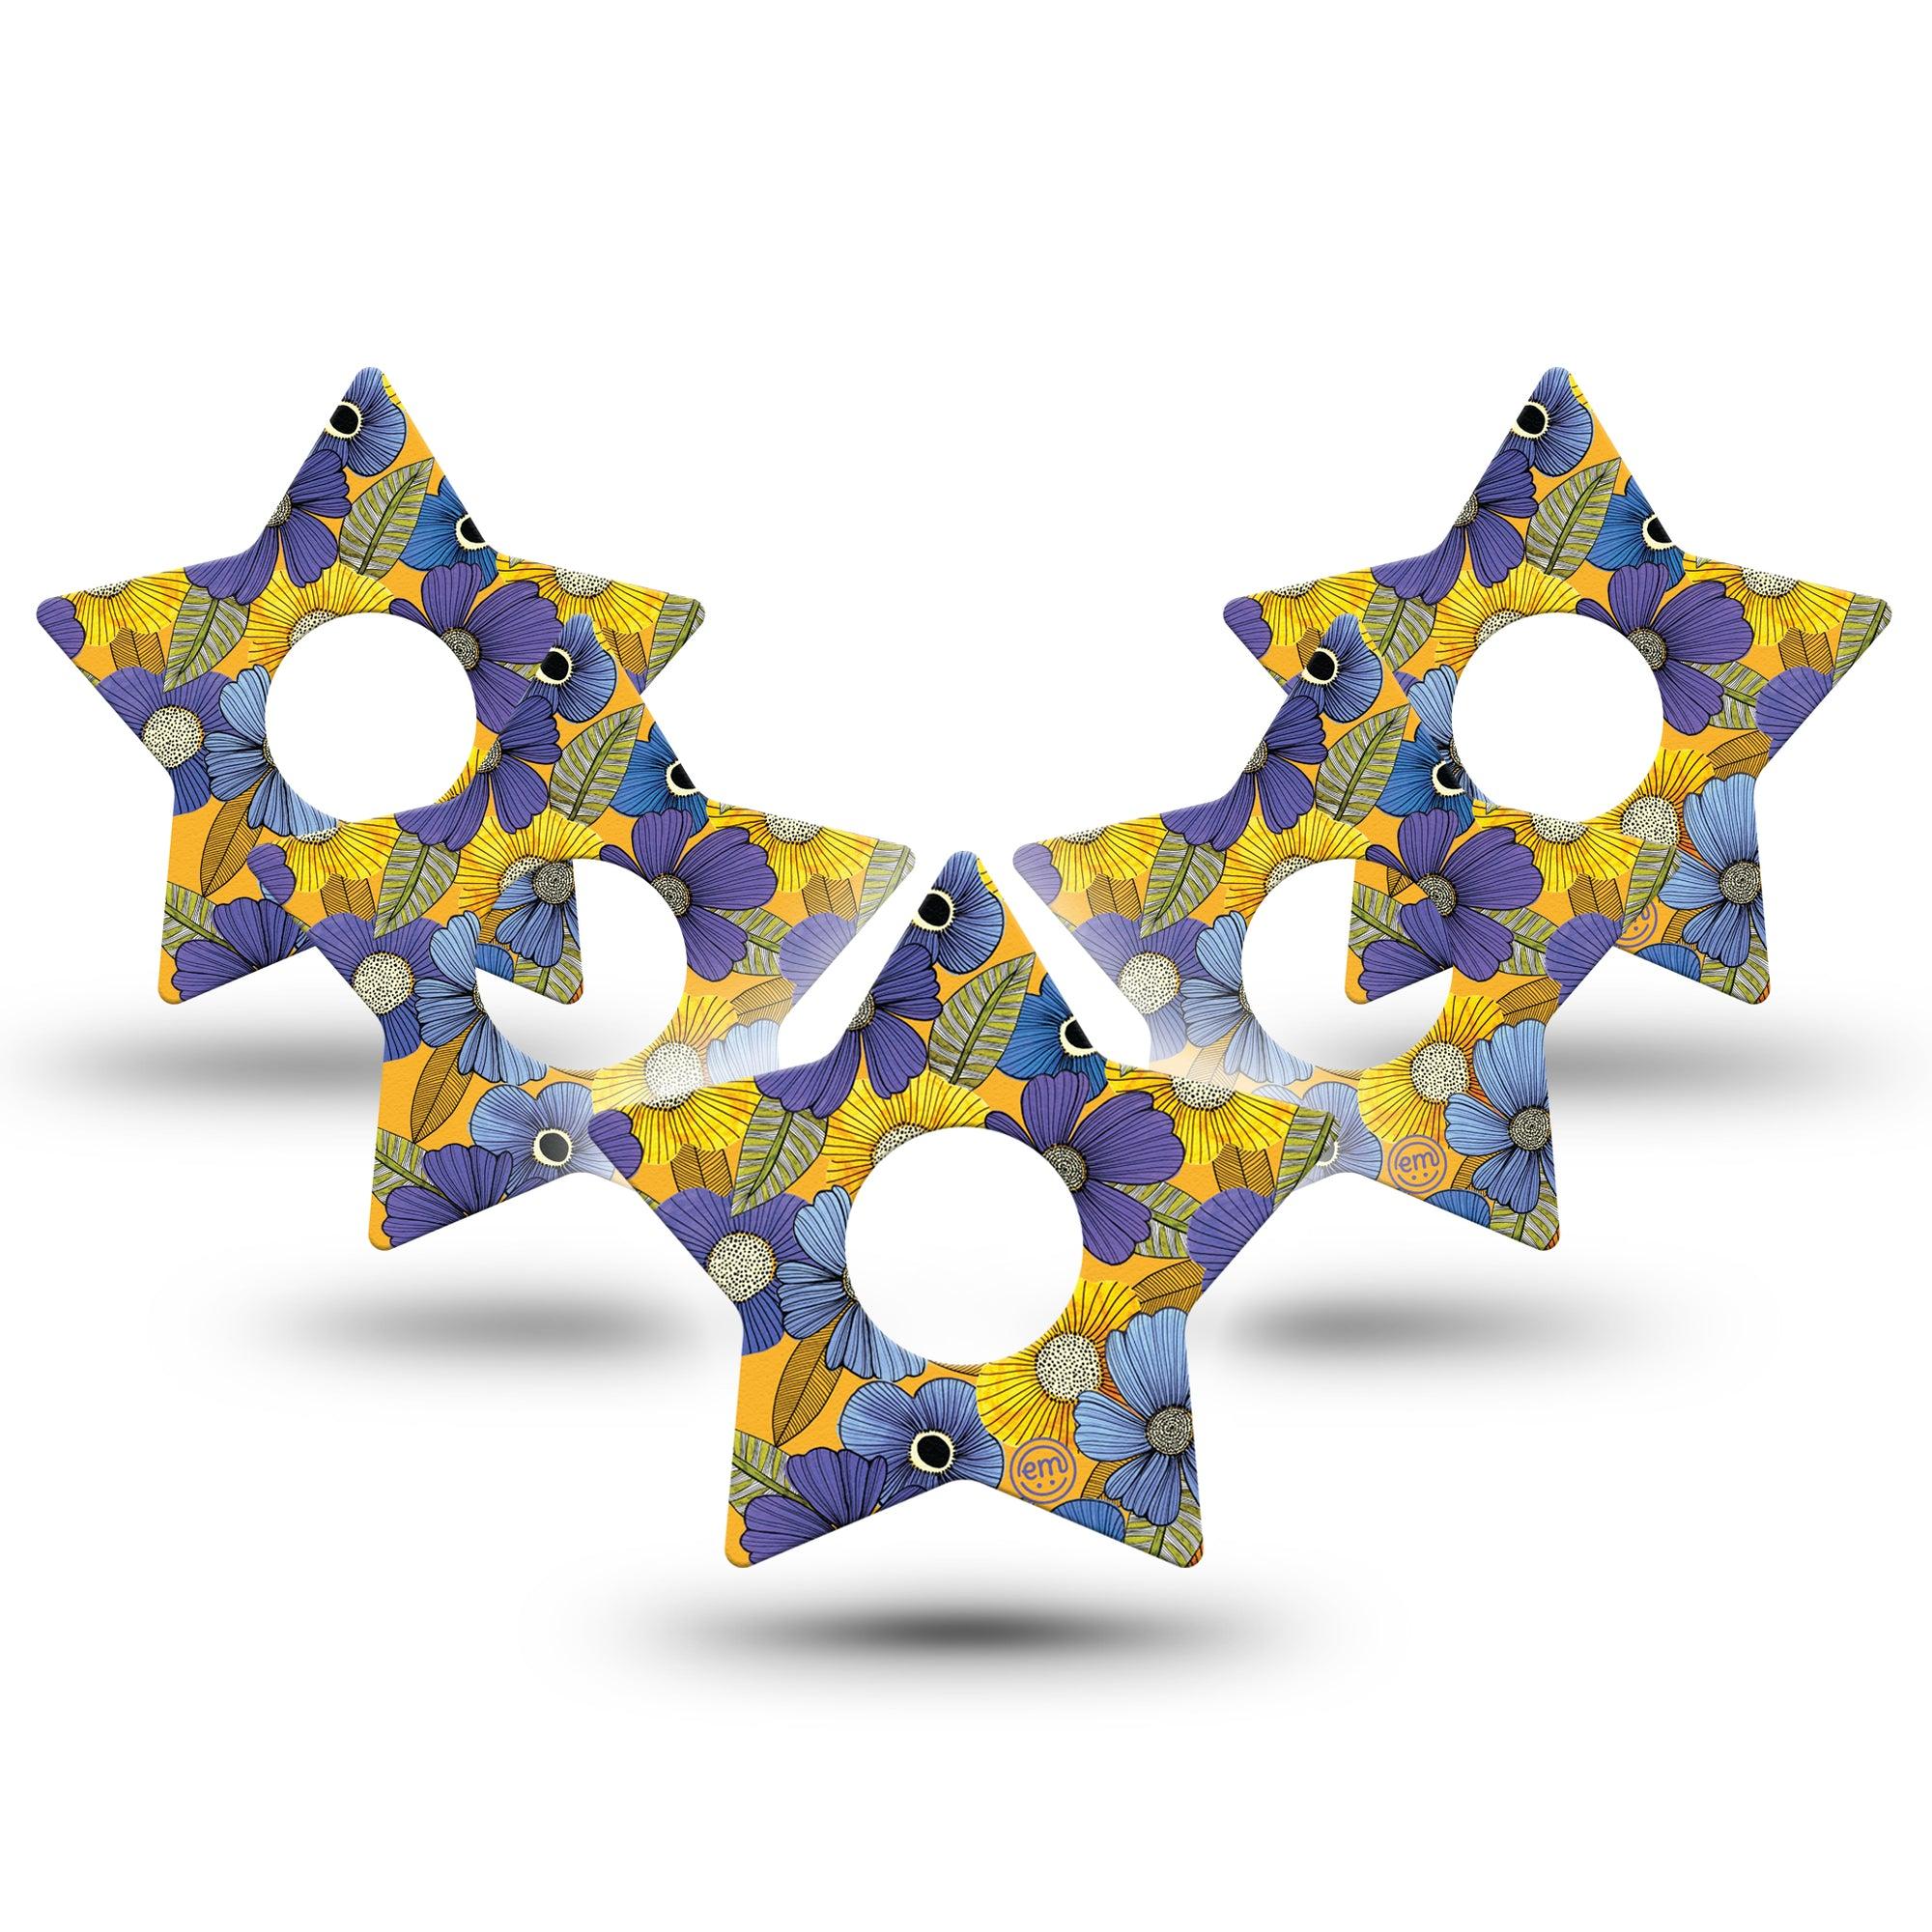 ExpressionMed Charming Blooms Star Libre 3 Tape, 5-Pack, Blossom Charms Themed, CGM Adhesive Patch Design